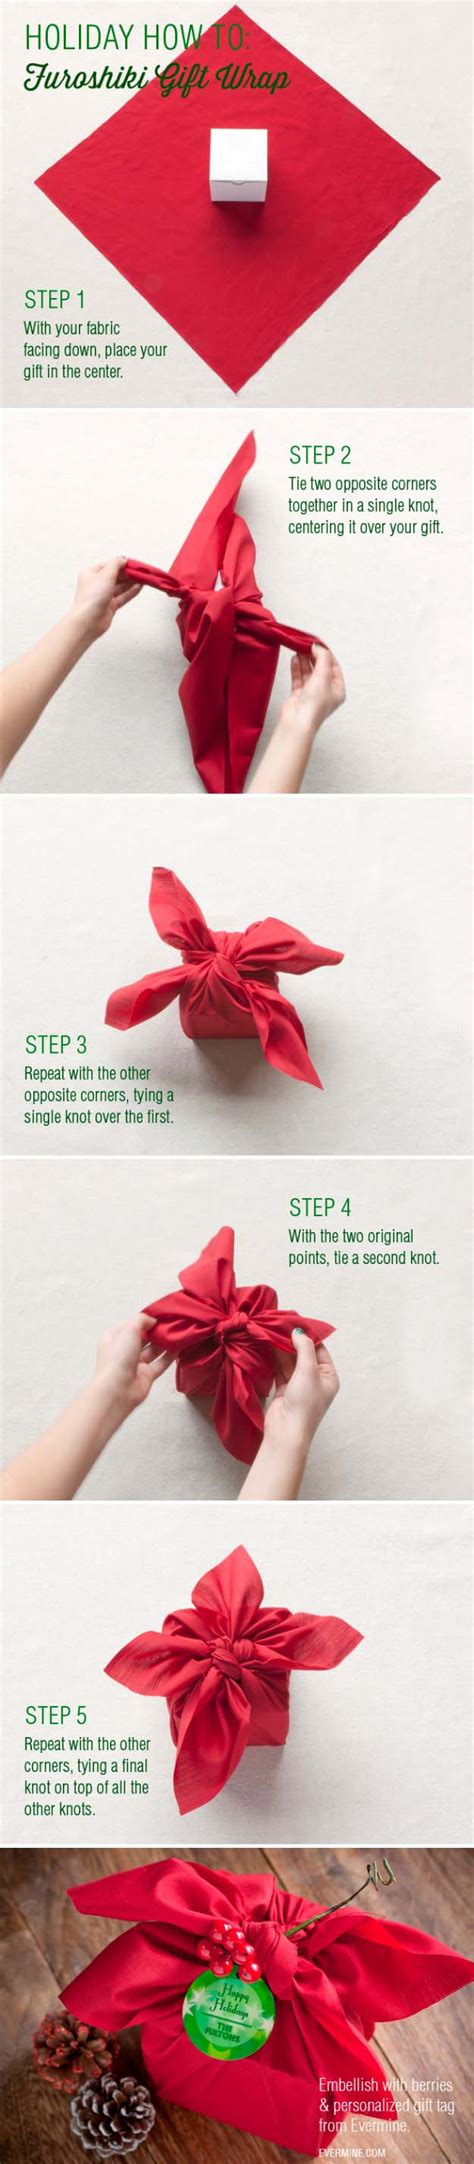 If you want to add a bow and a tag, have step 1: 52 Insanely Clever Gift Wrapping Ideas You'll Love!